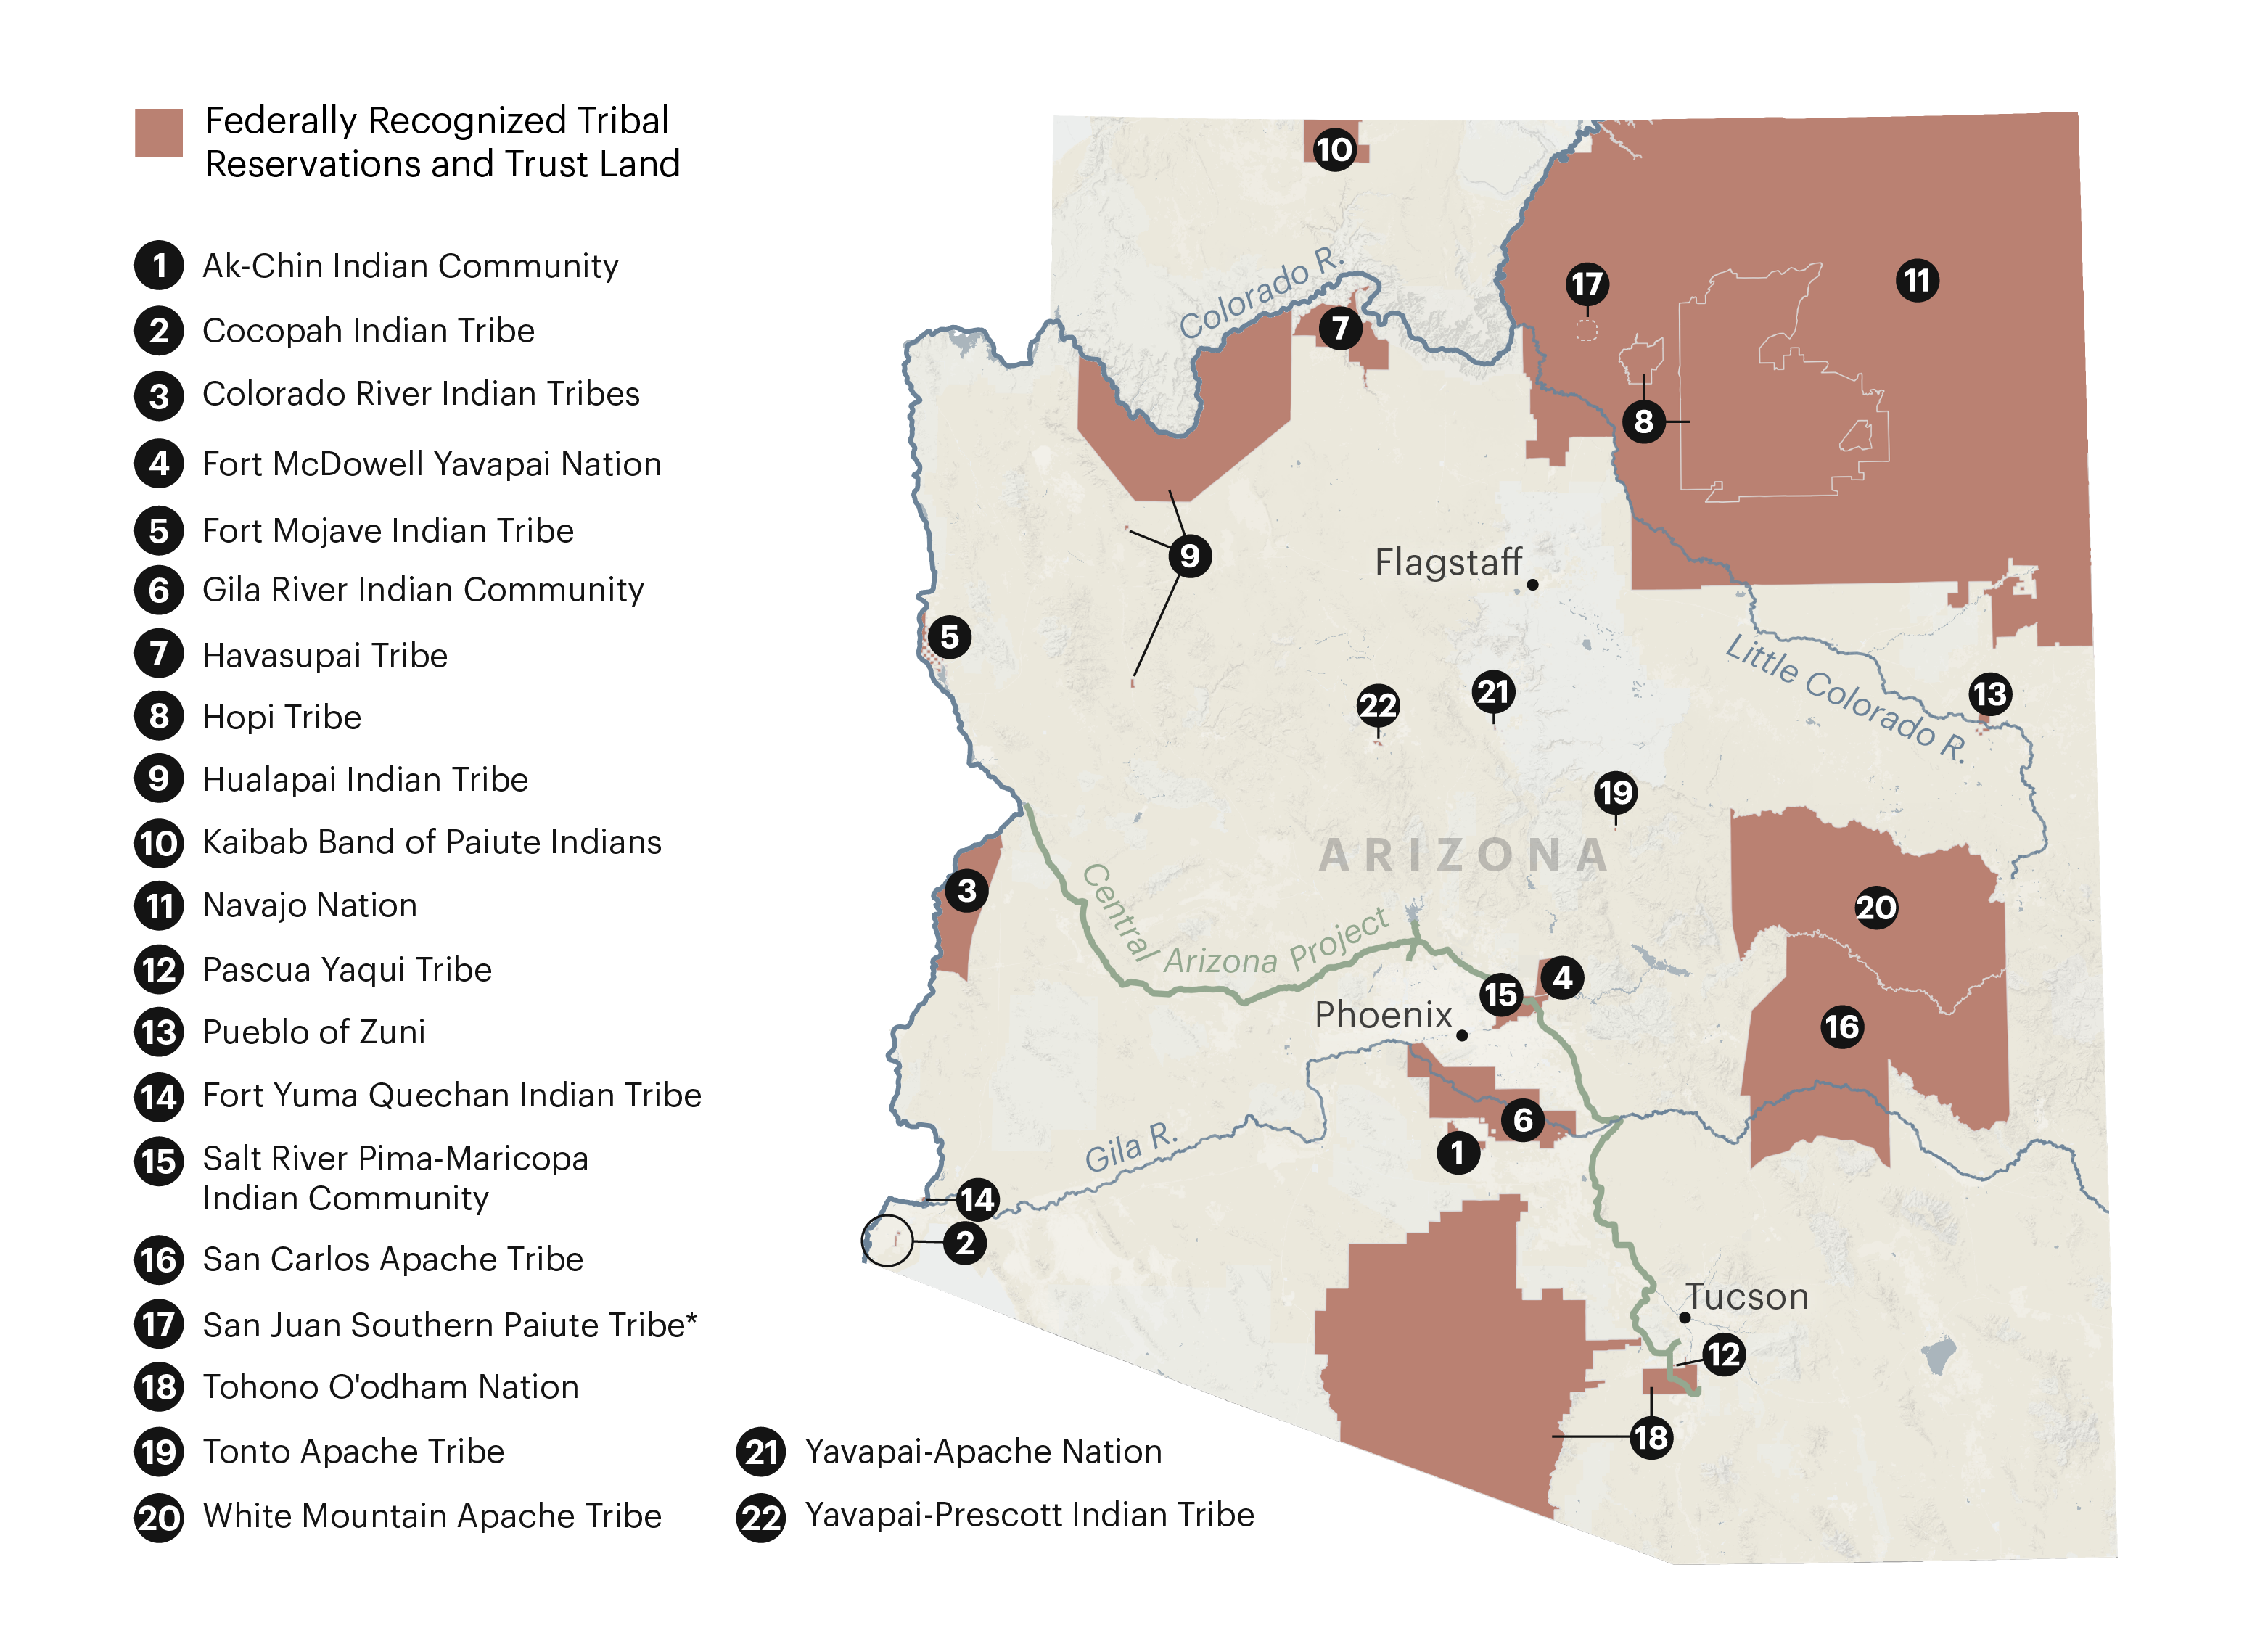 A map of Arizona showing federally recognized reservations and trust land.